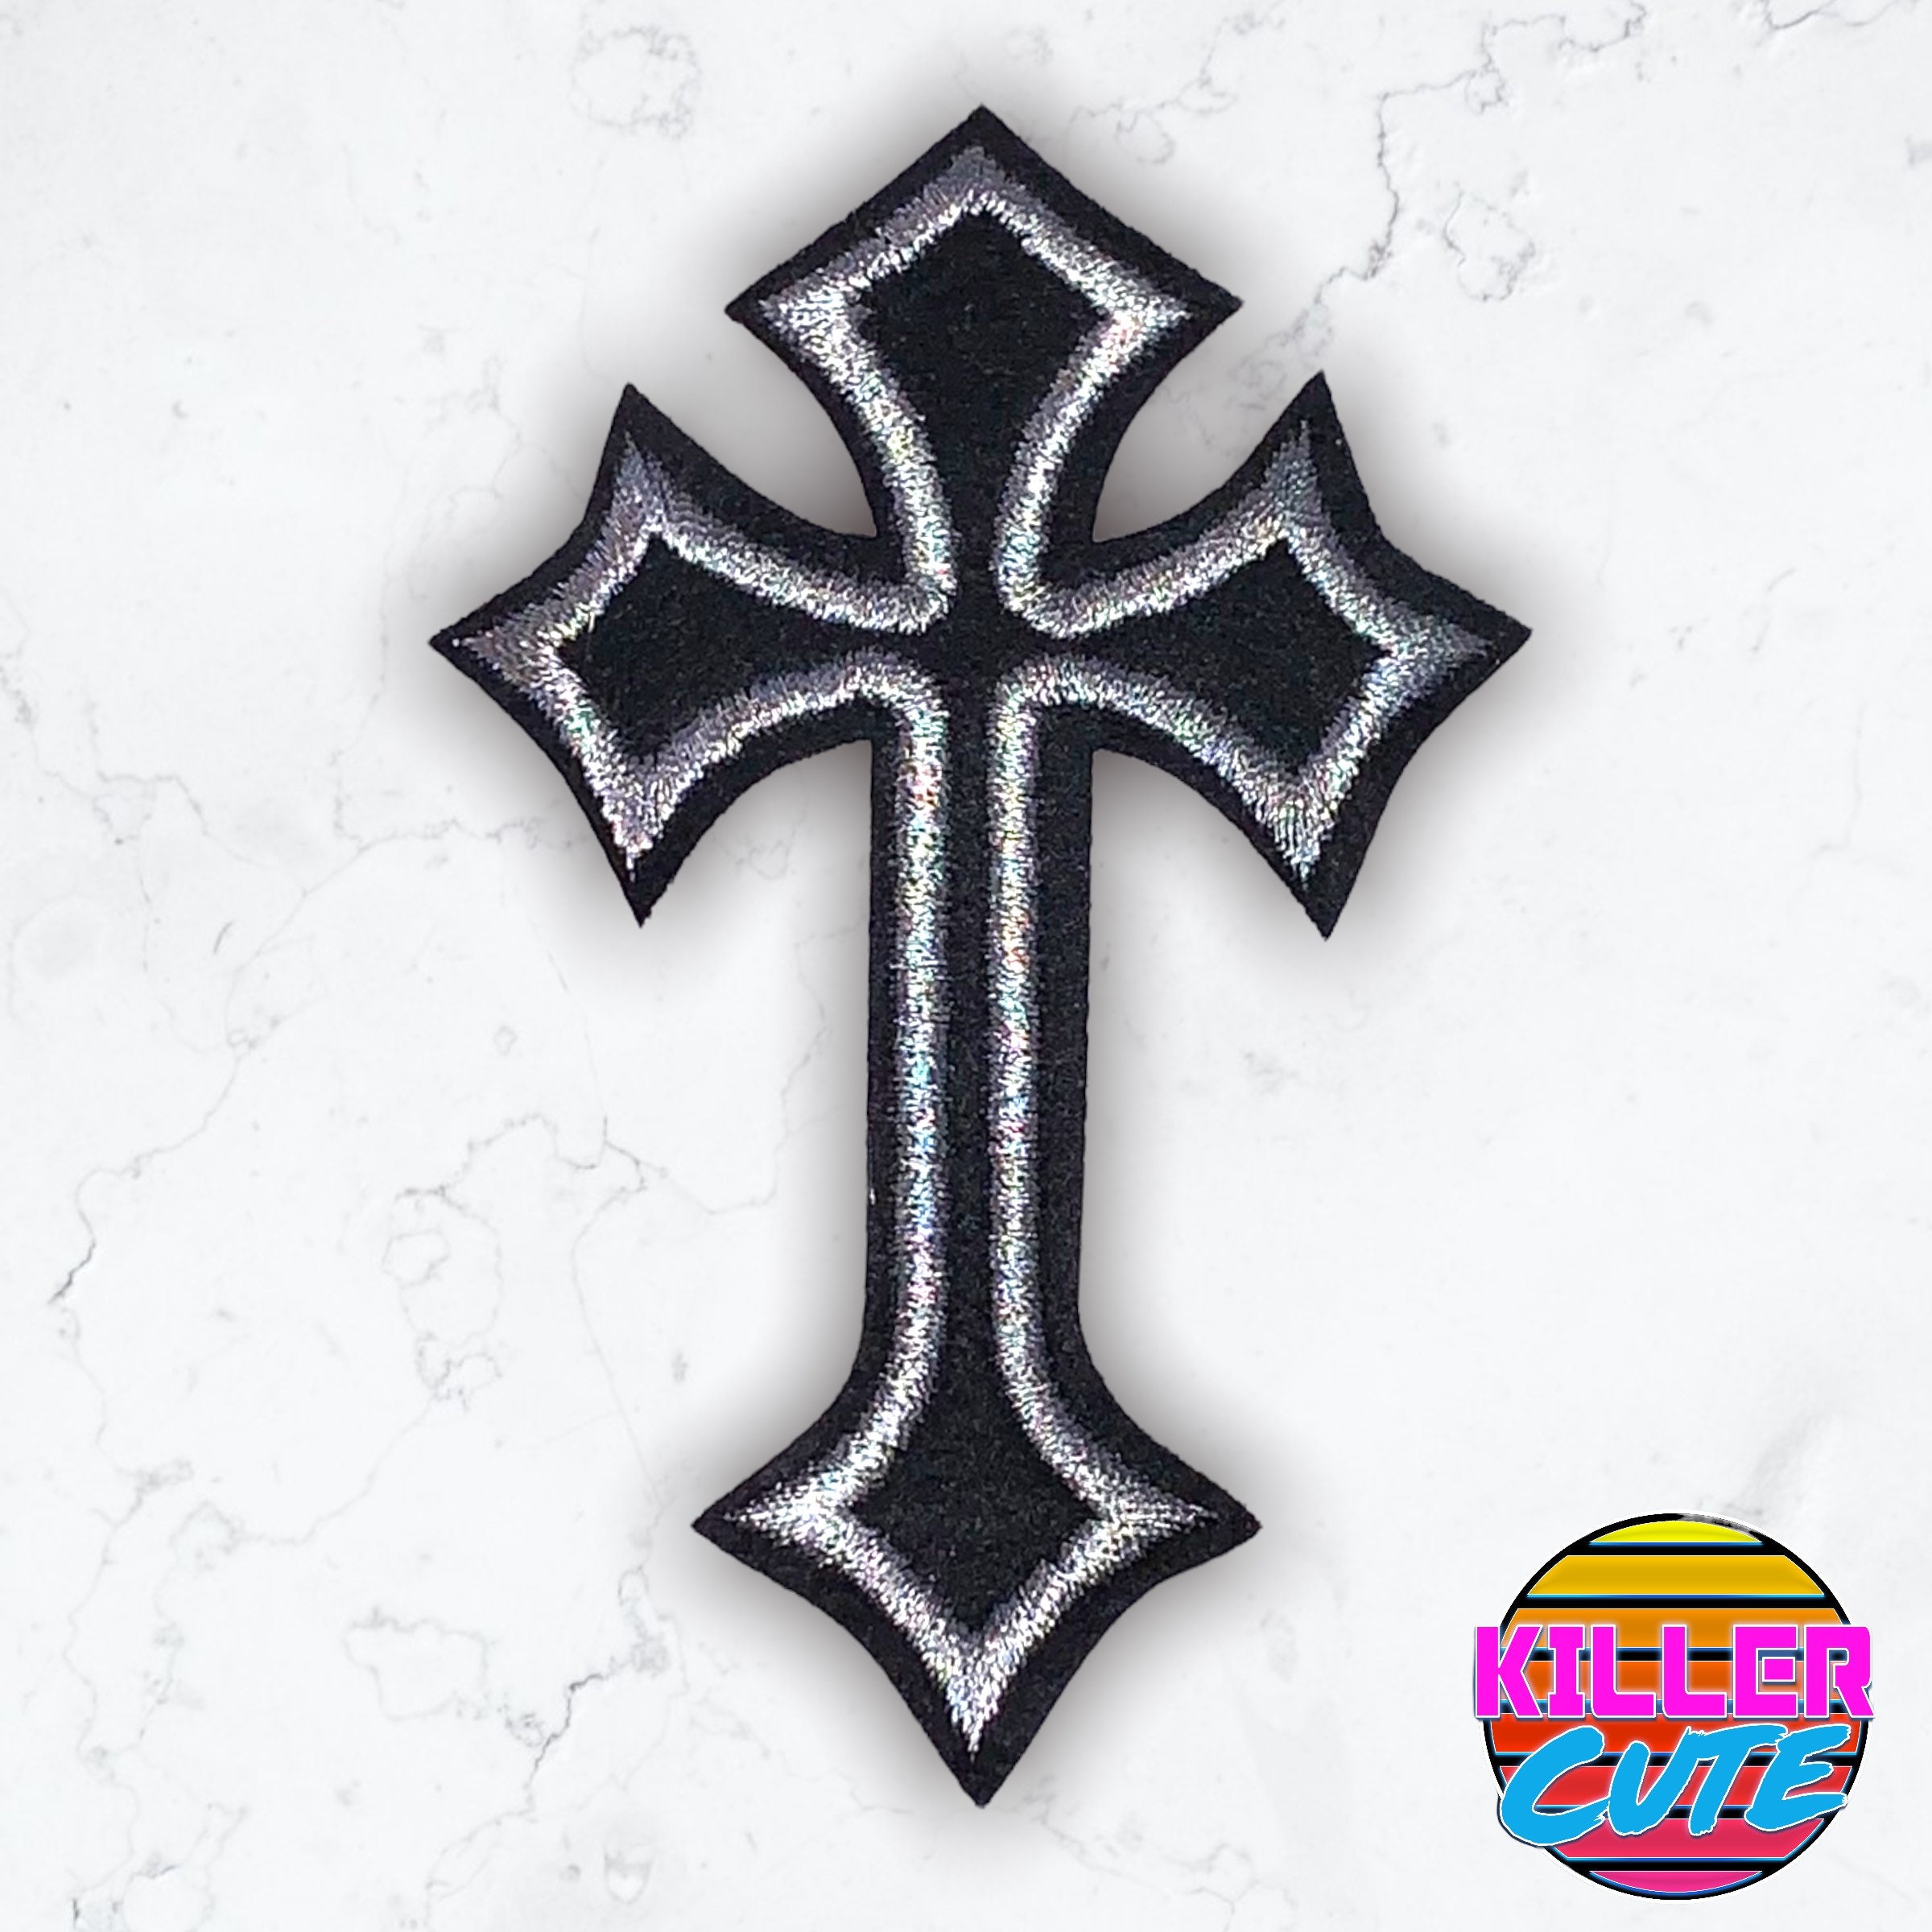 Christian Cross patch embroidered Black and White